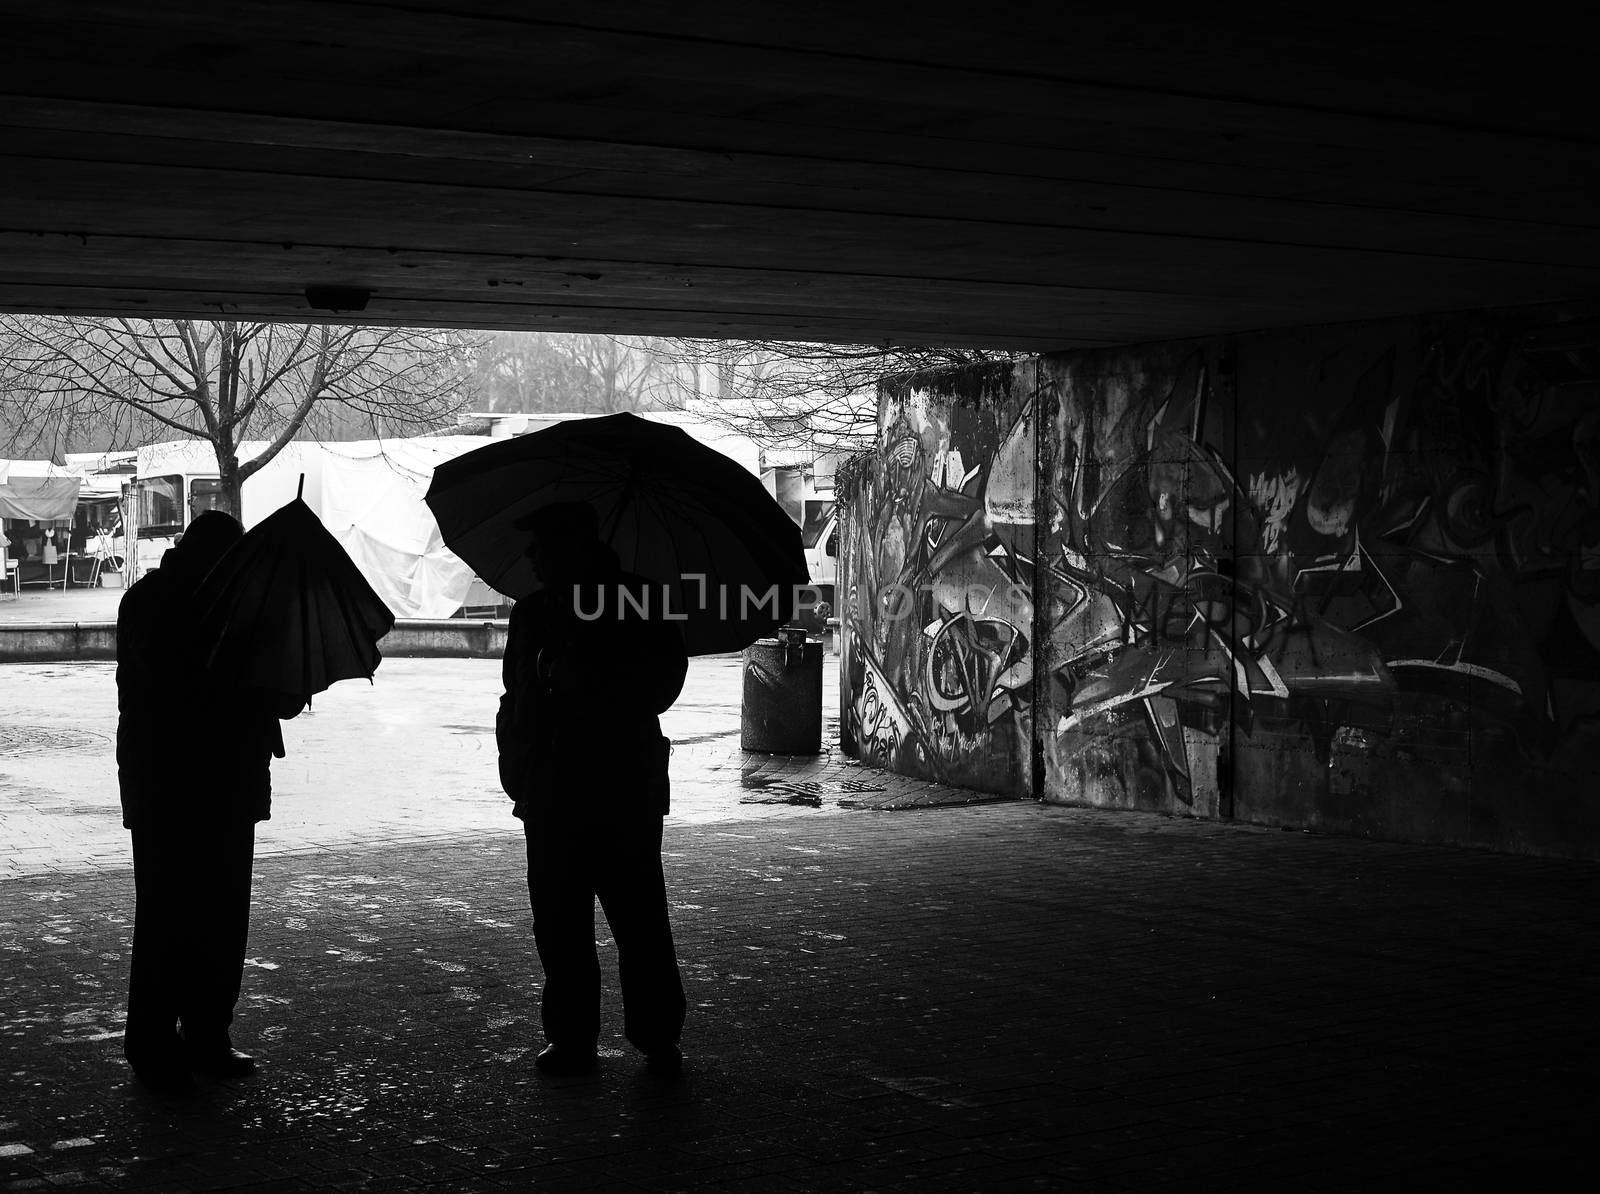 Black and white image of two people with umbrellas outdoor